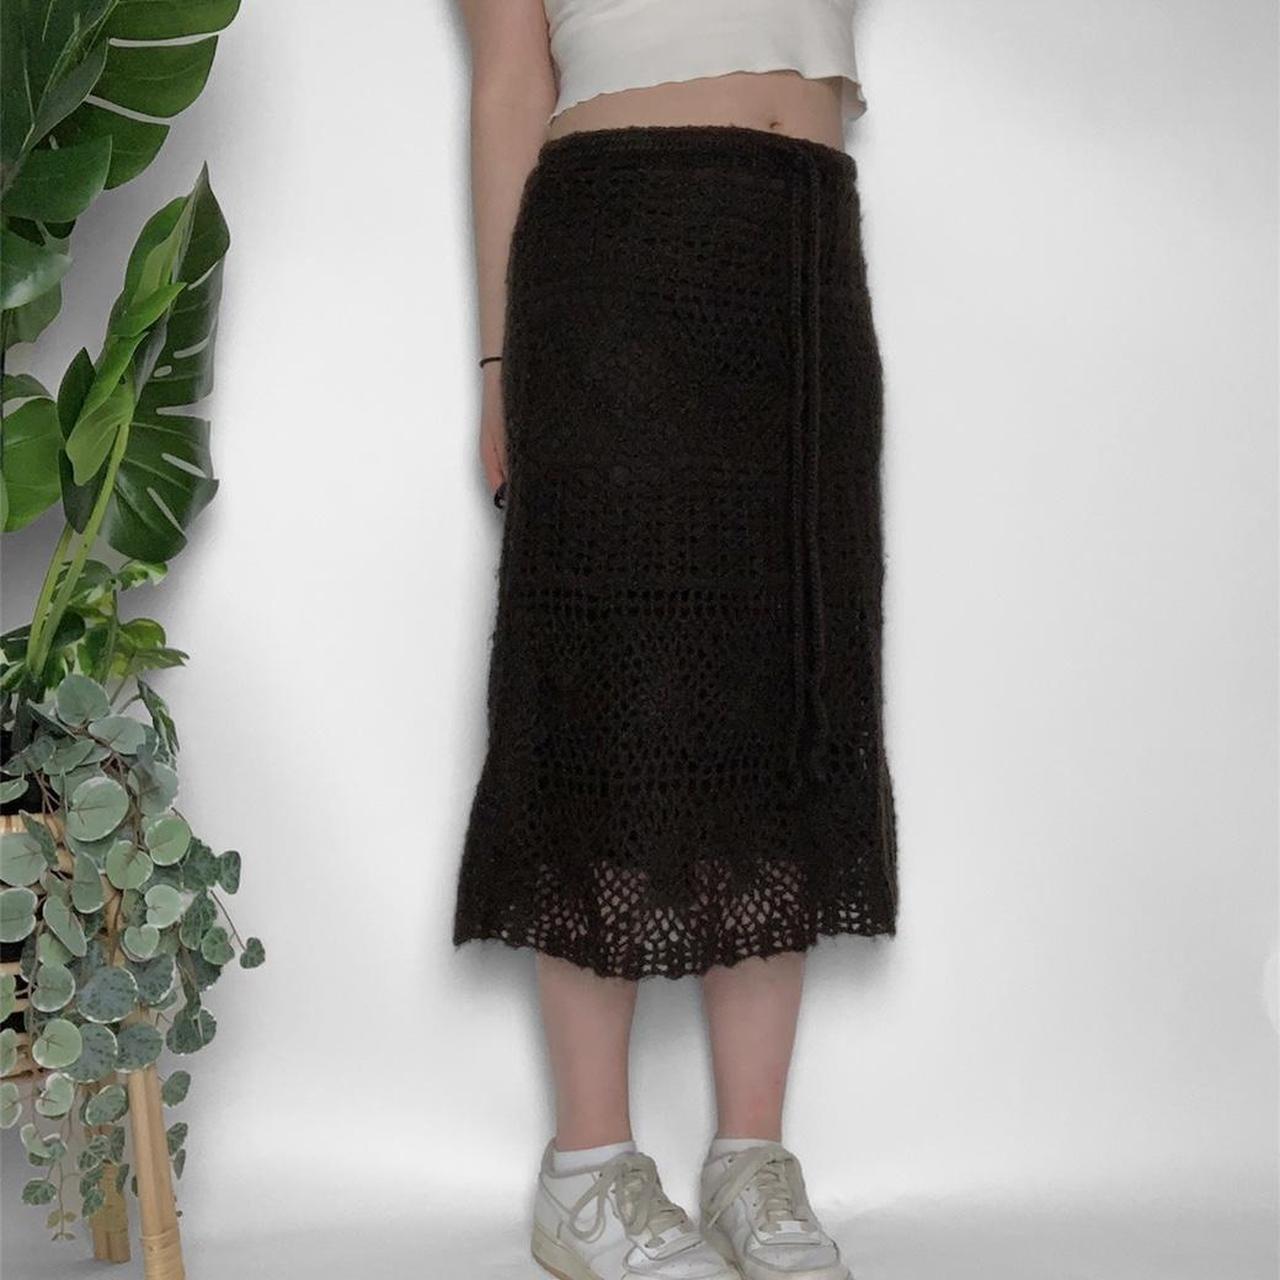 French vintage 90s chocolate brown crochet knit midi skirt